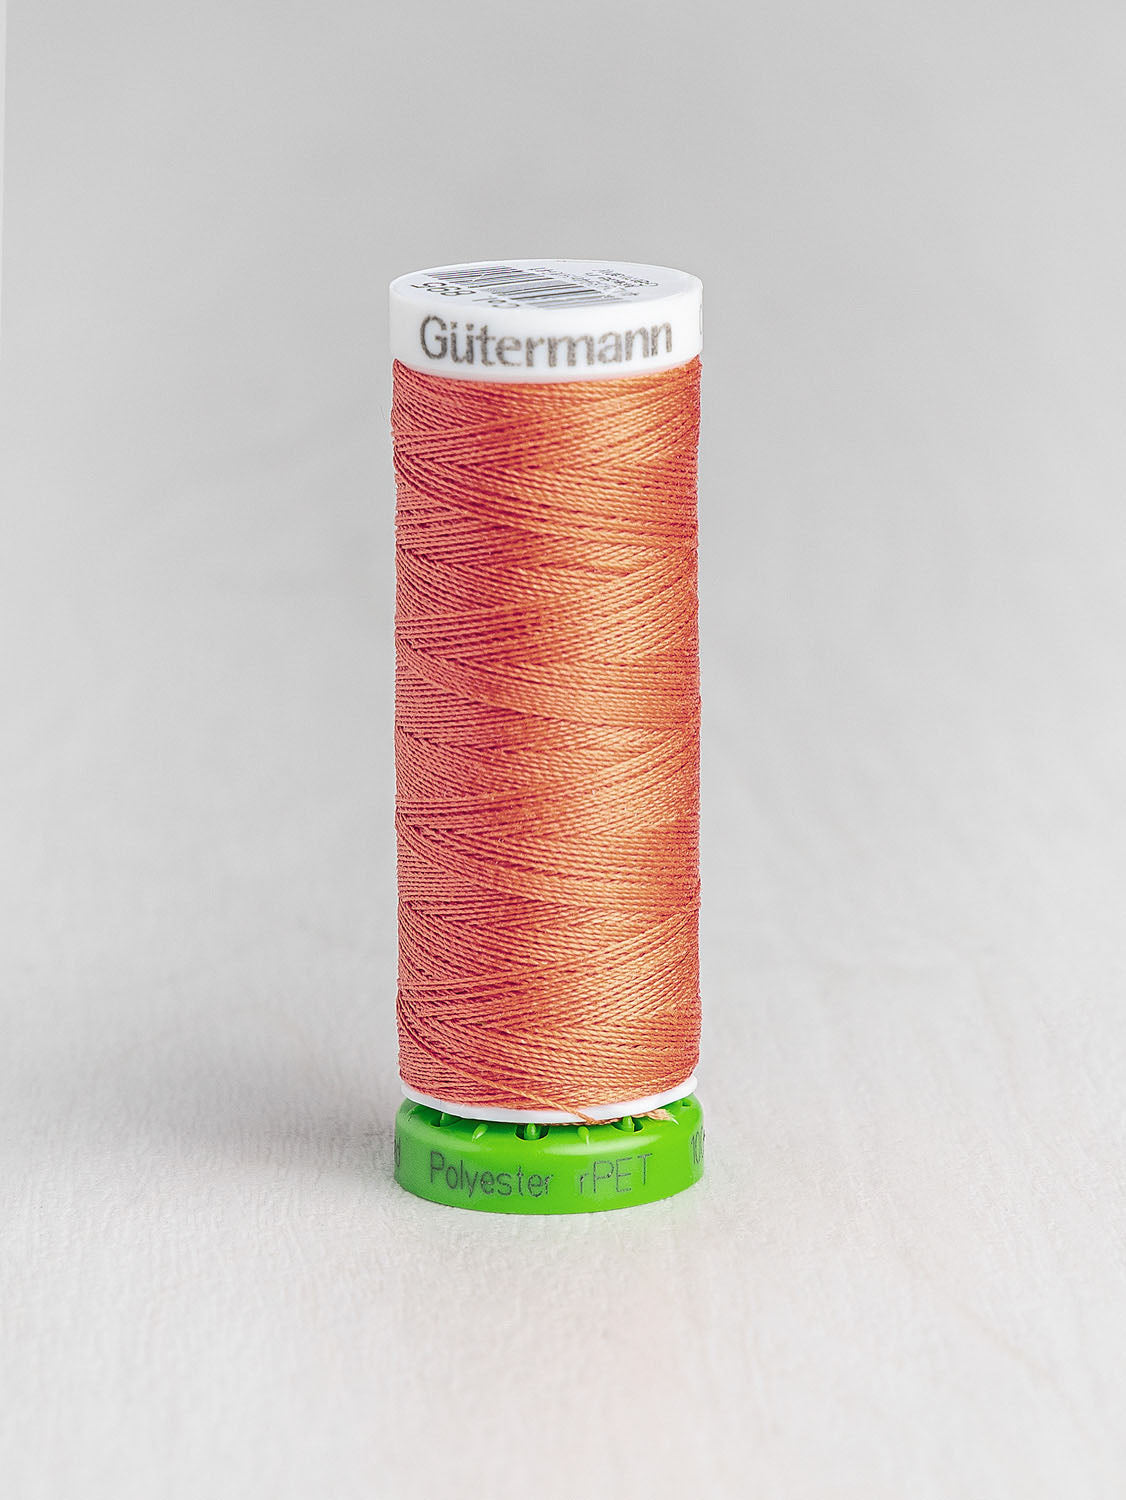 Gütermann All Purpose rPET Recycled Thread - Coral 895 | Core Fabrics